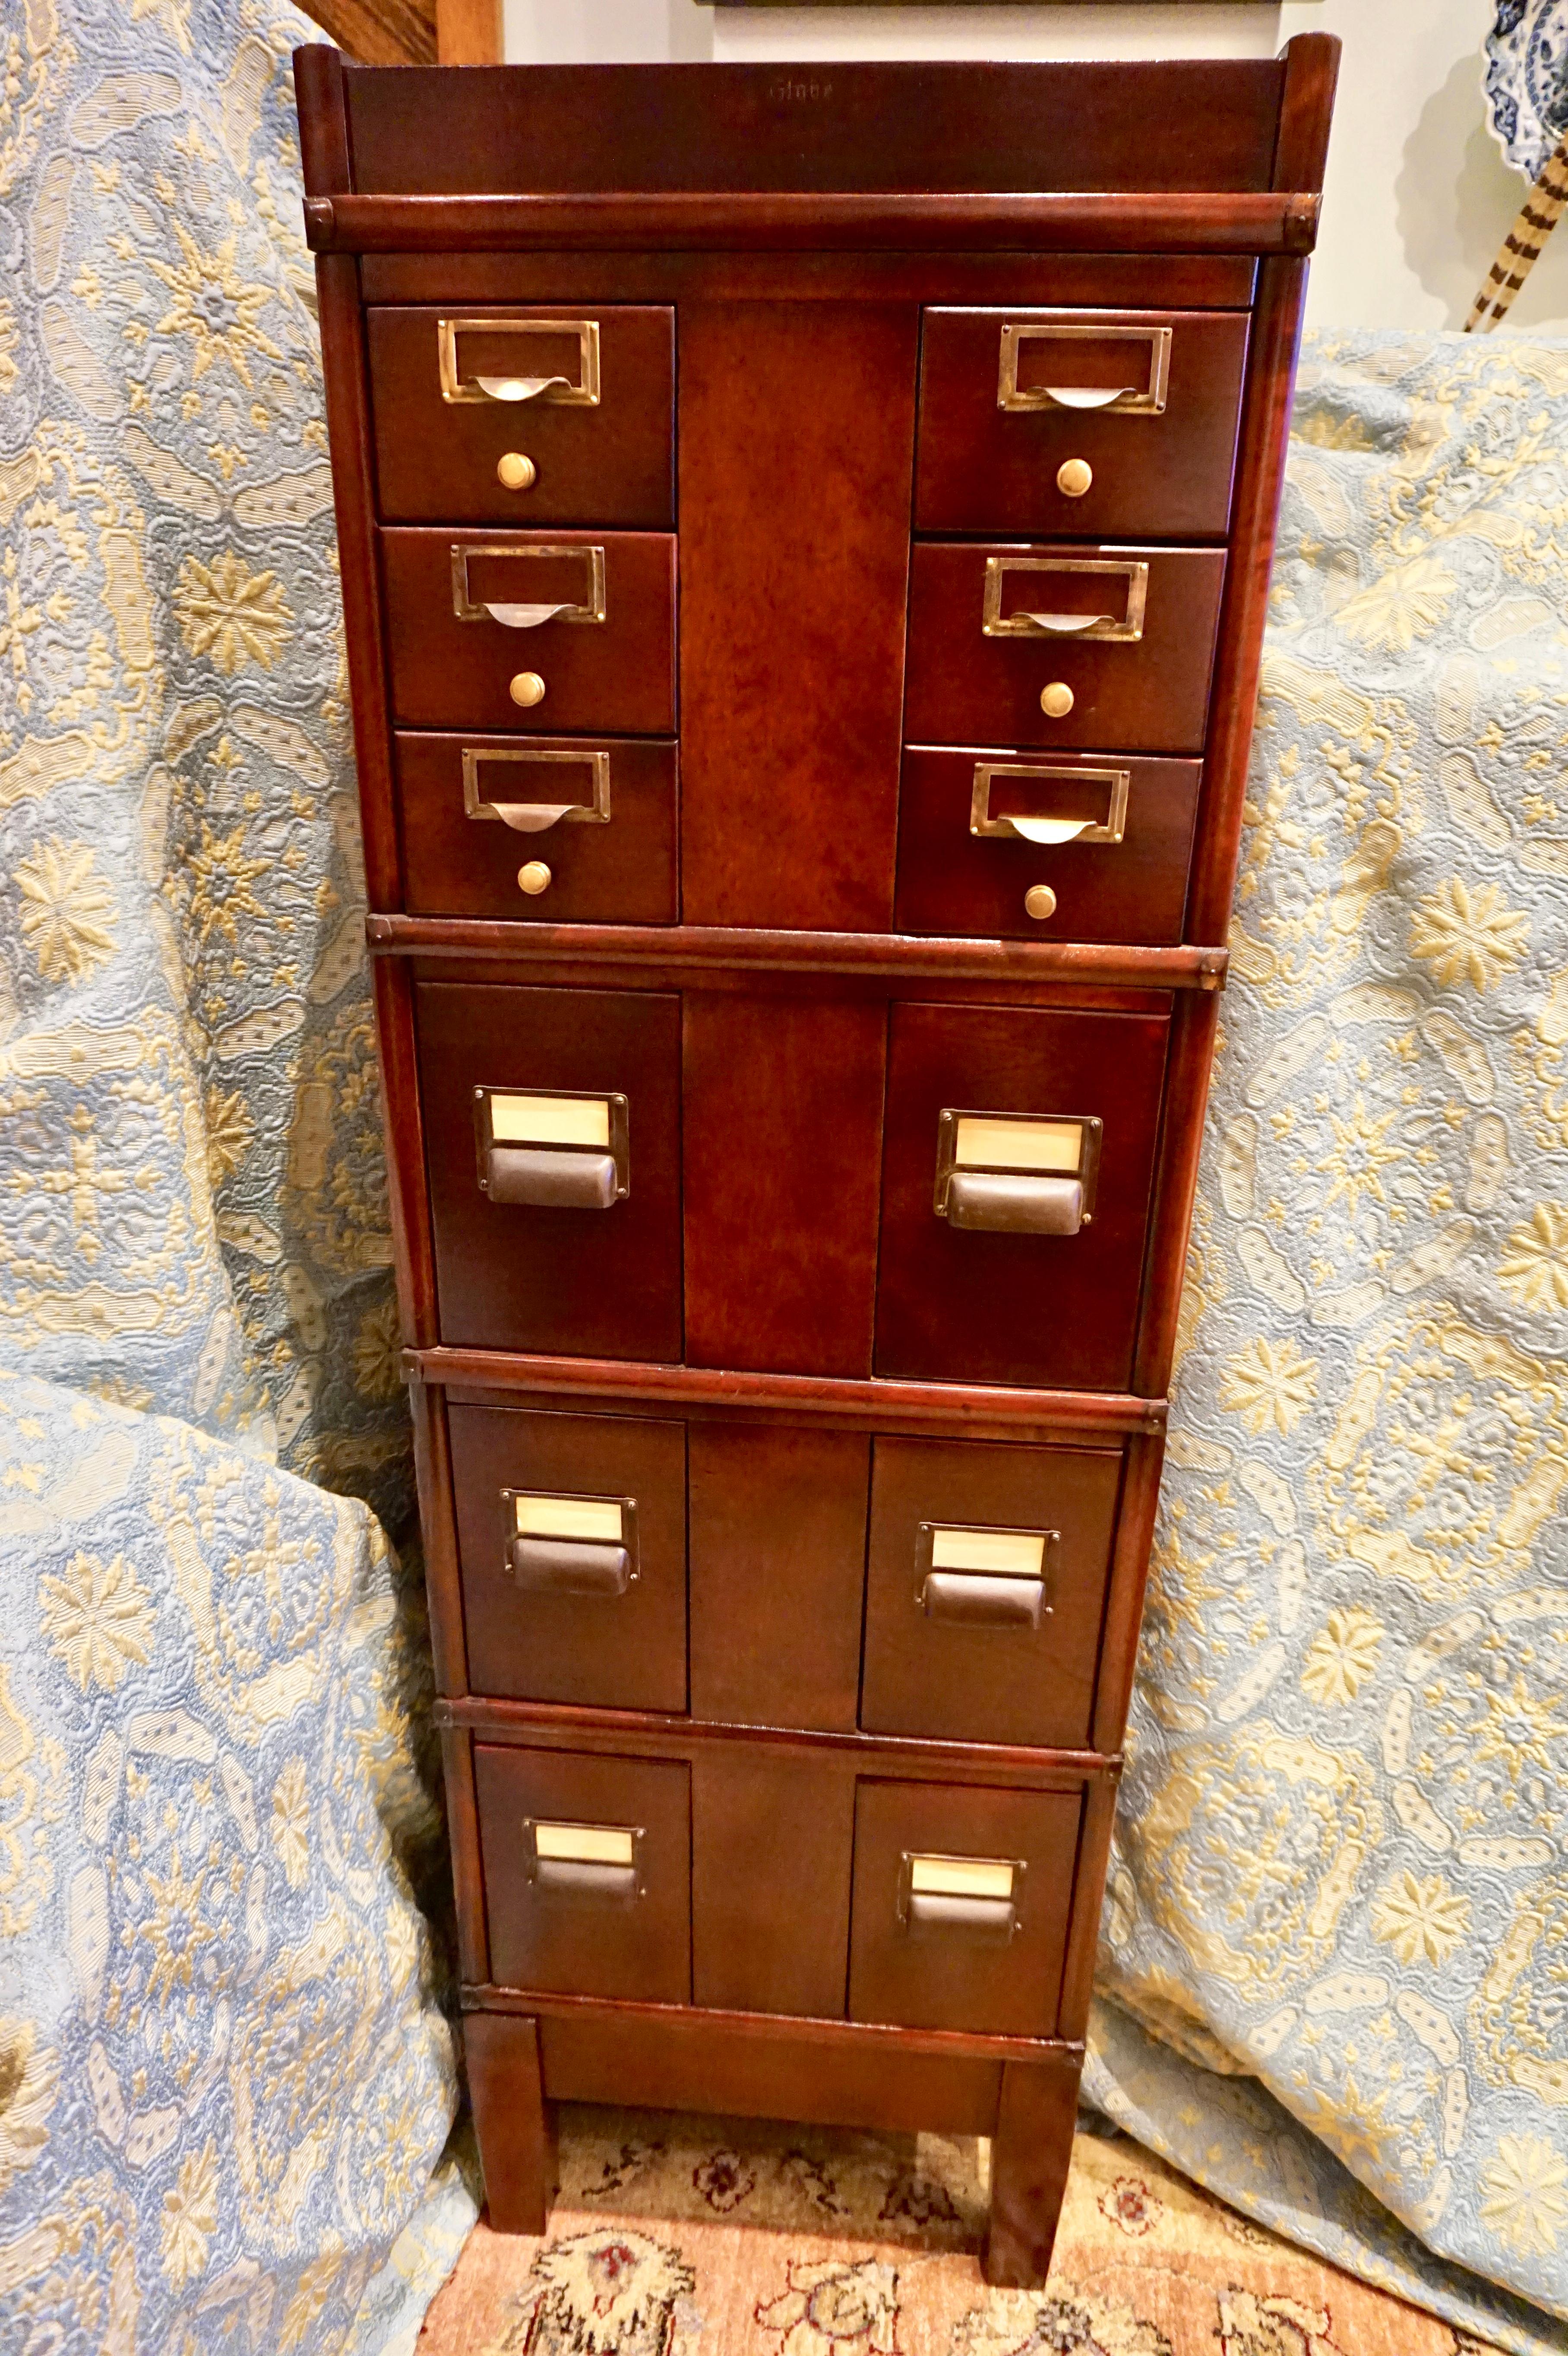 Exquisite solid Mahogany filing cabinet with brass hardware. Stacking mechanism for ease of movement with paneling on the sides and brass knobs. Stamped and sits on a raised stand. Practical with much Arts & Crafts elegance and charm. A true